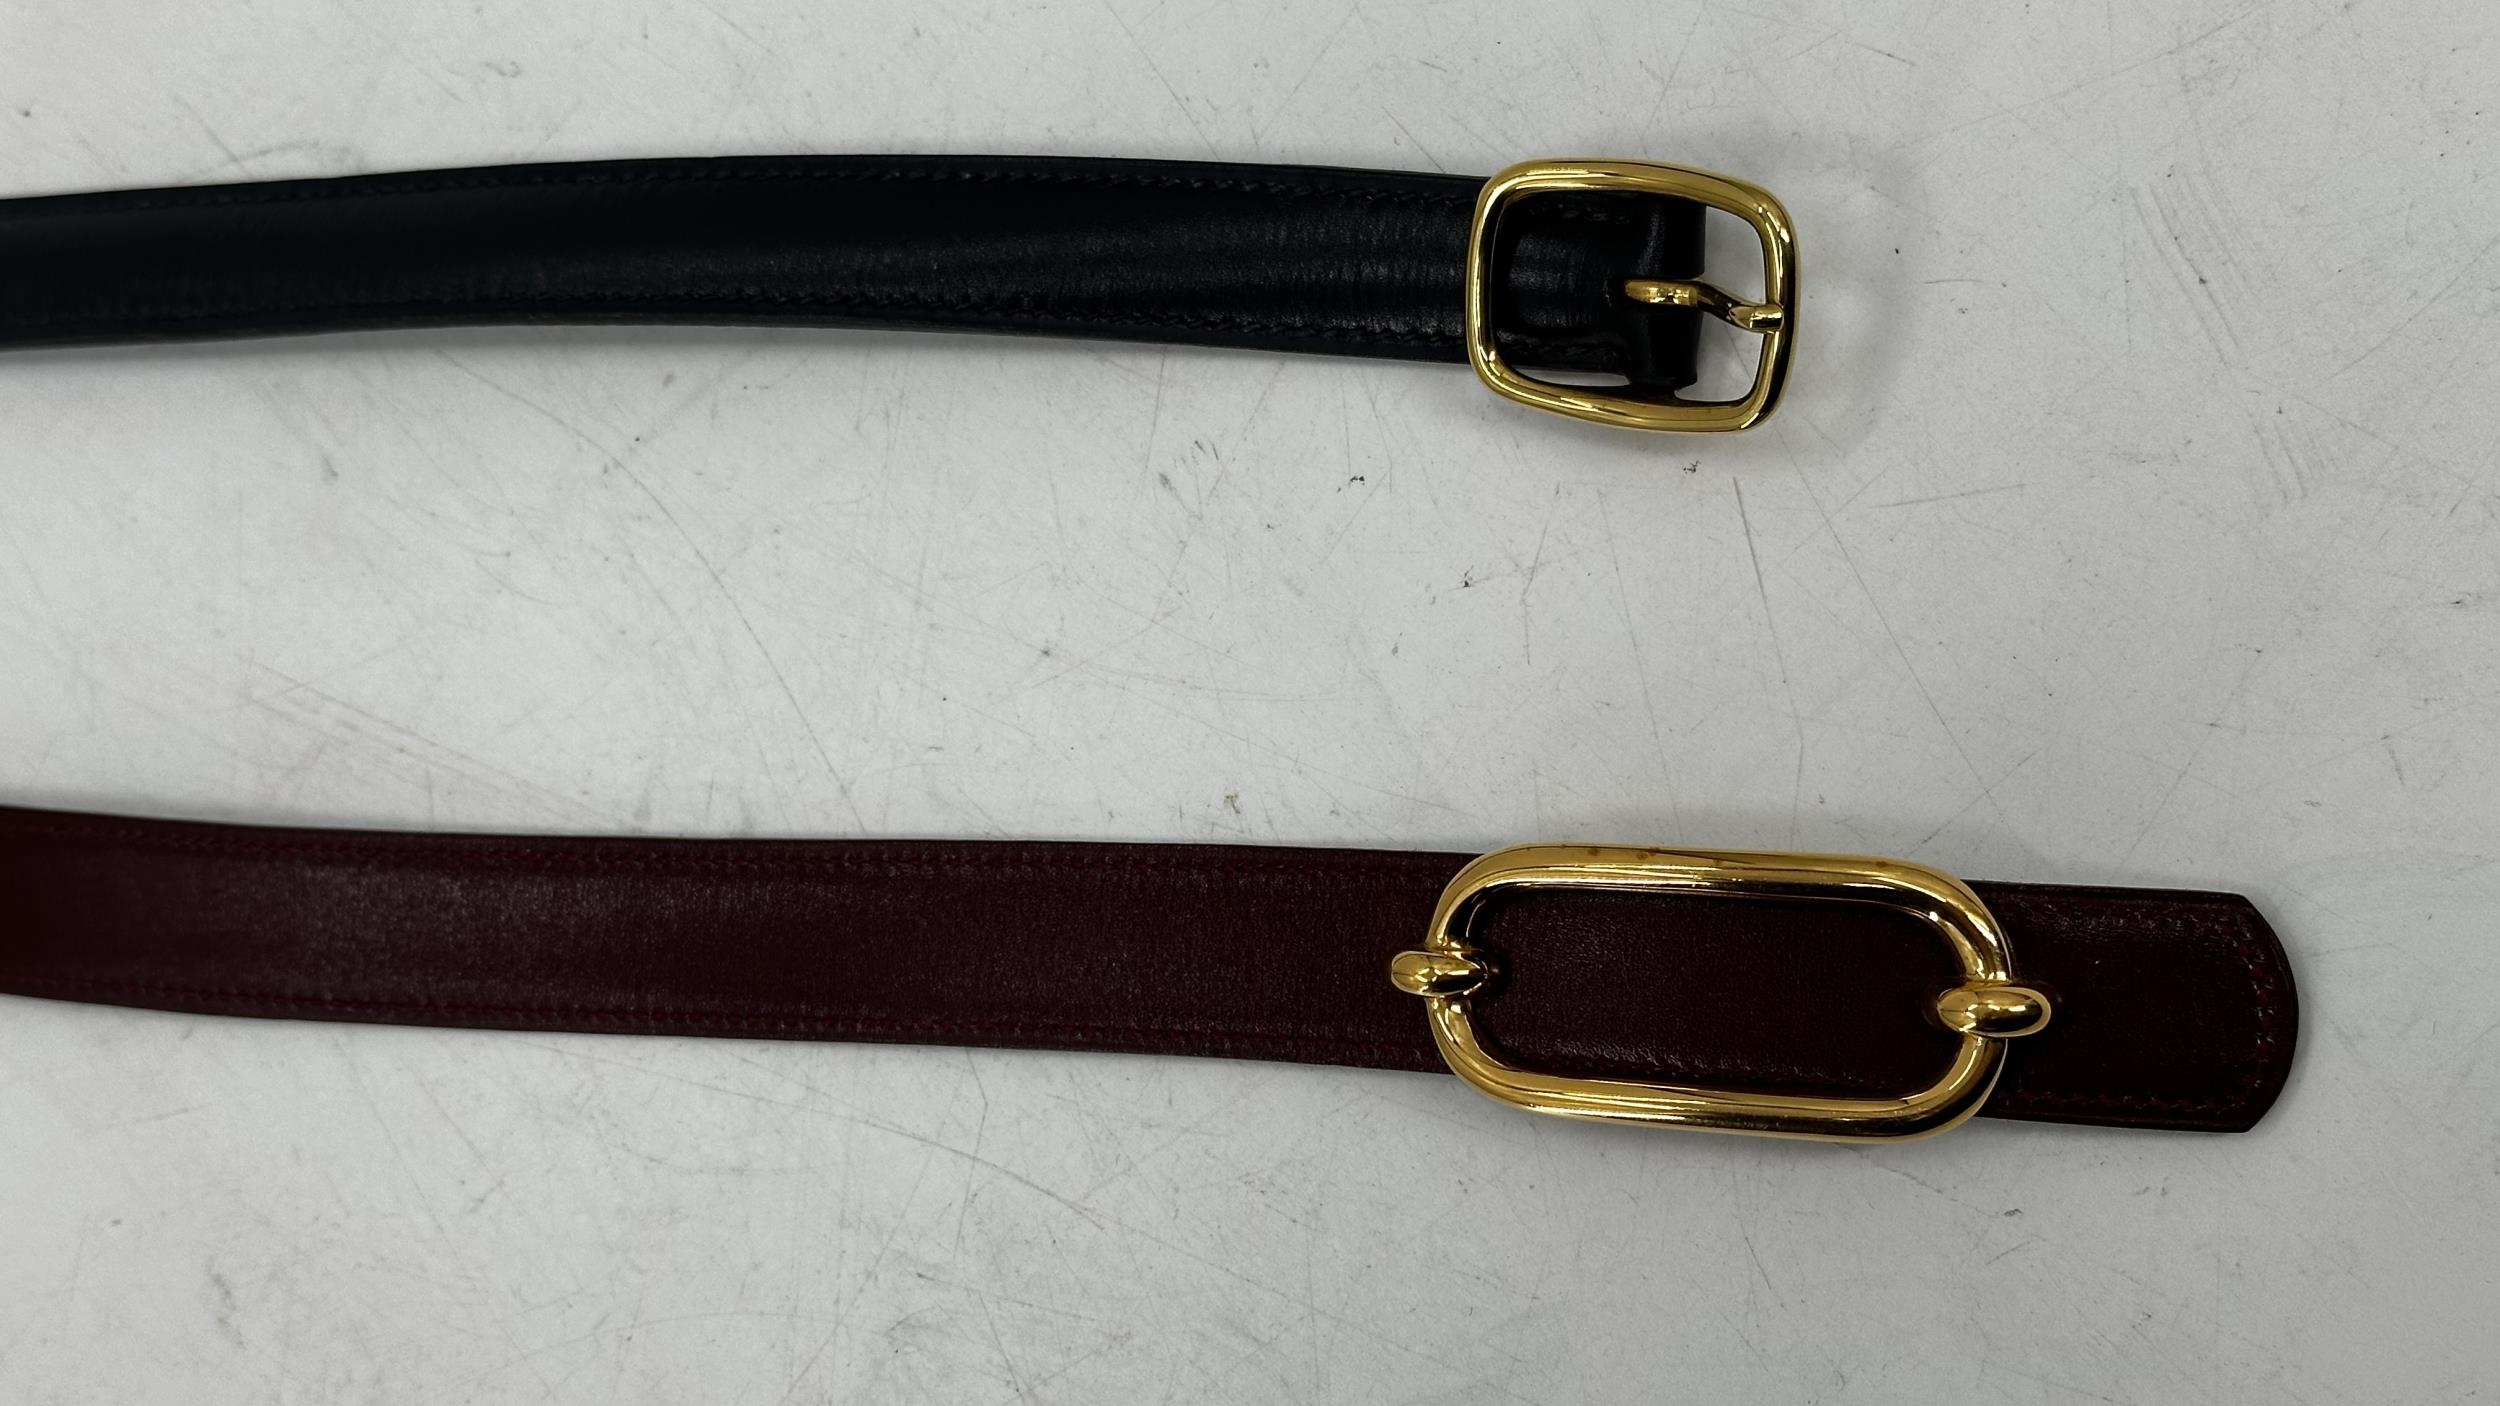 HERMES leather reversible belt, with buckle dust cover and bag, condition good, minor wear; and a - Image 4 of 7